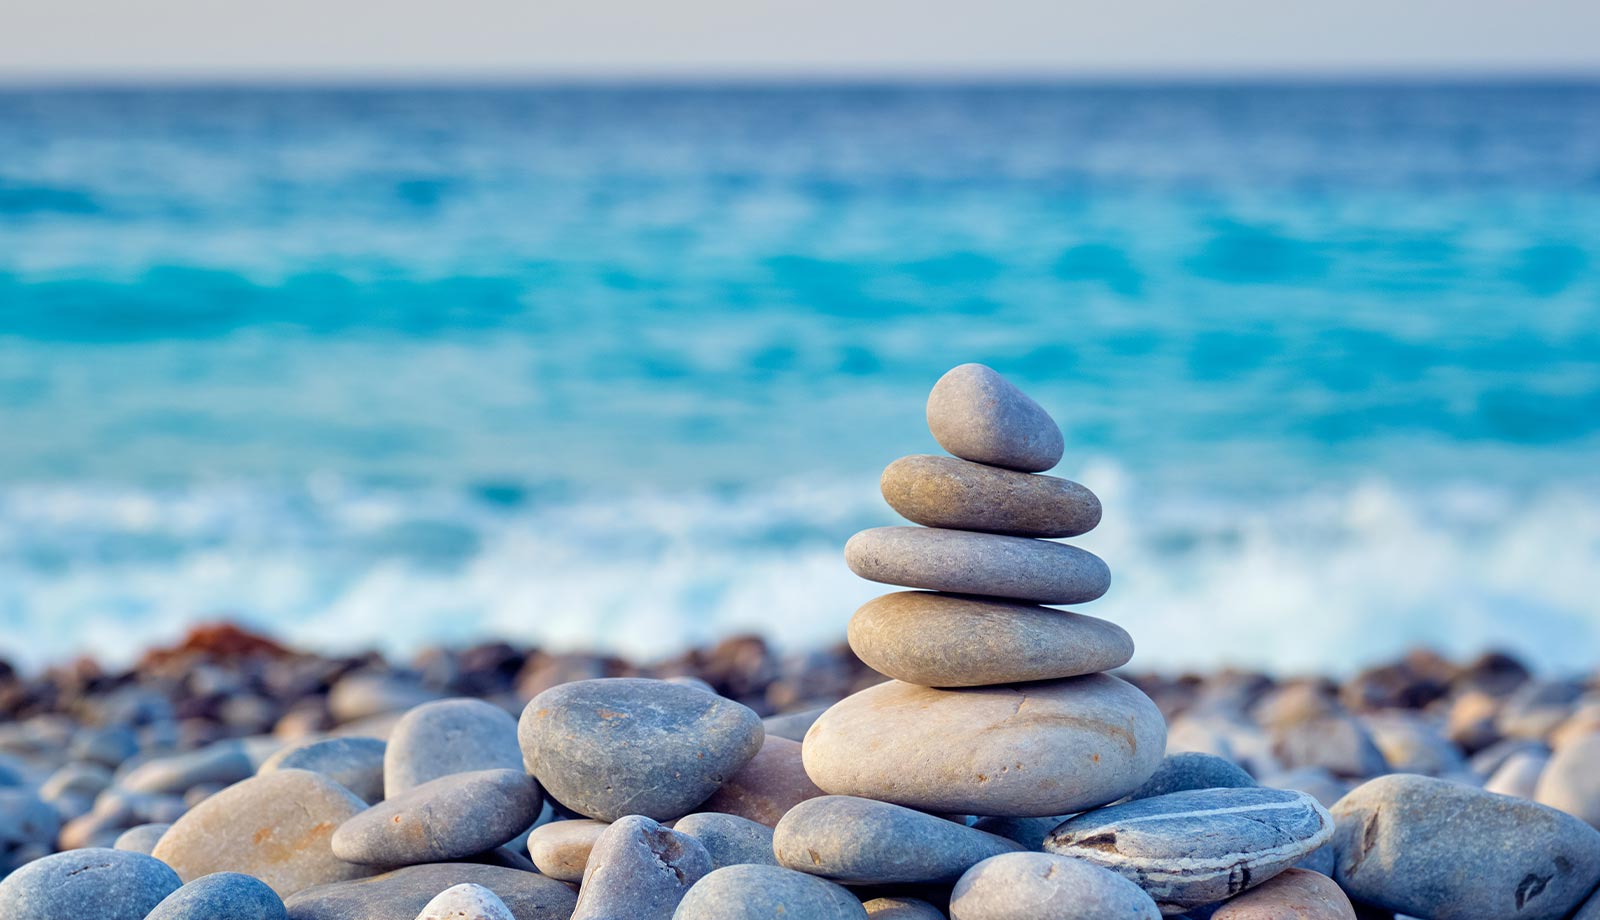 A stack of rocks on the beach near water